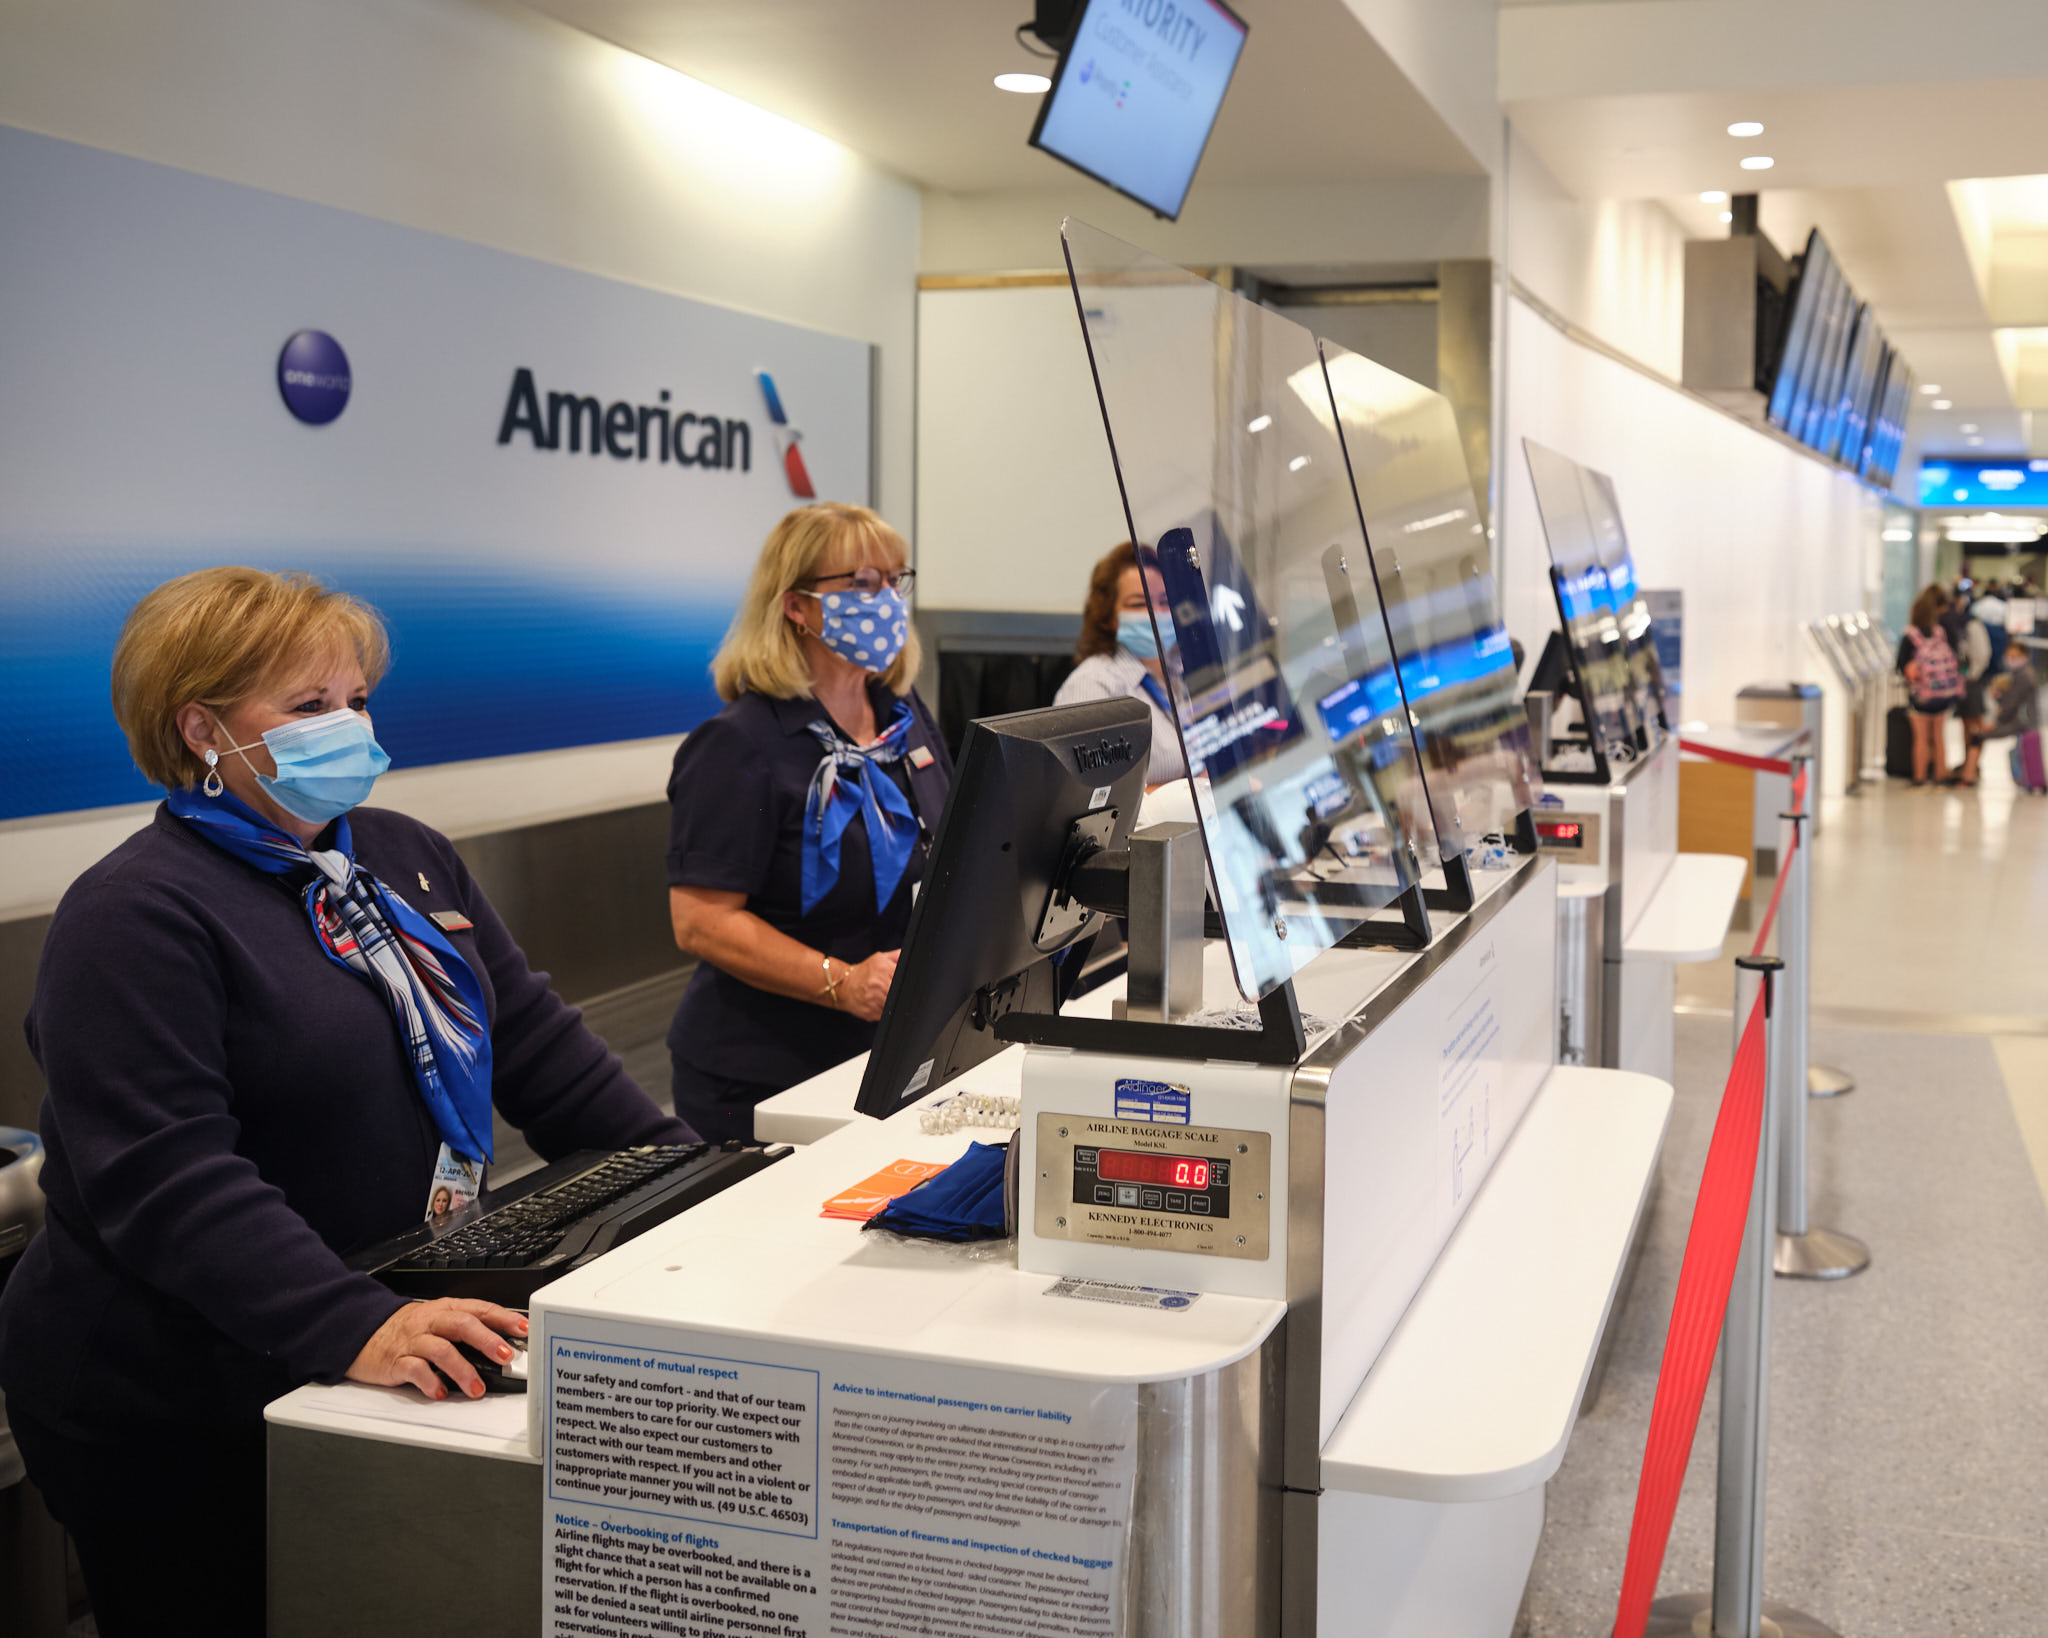 American Airlines Demonstrates Cleaning Process and Customer Experience